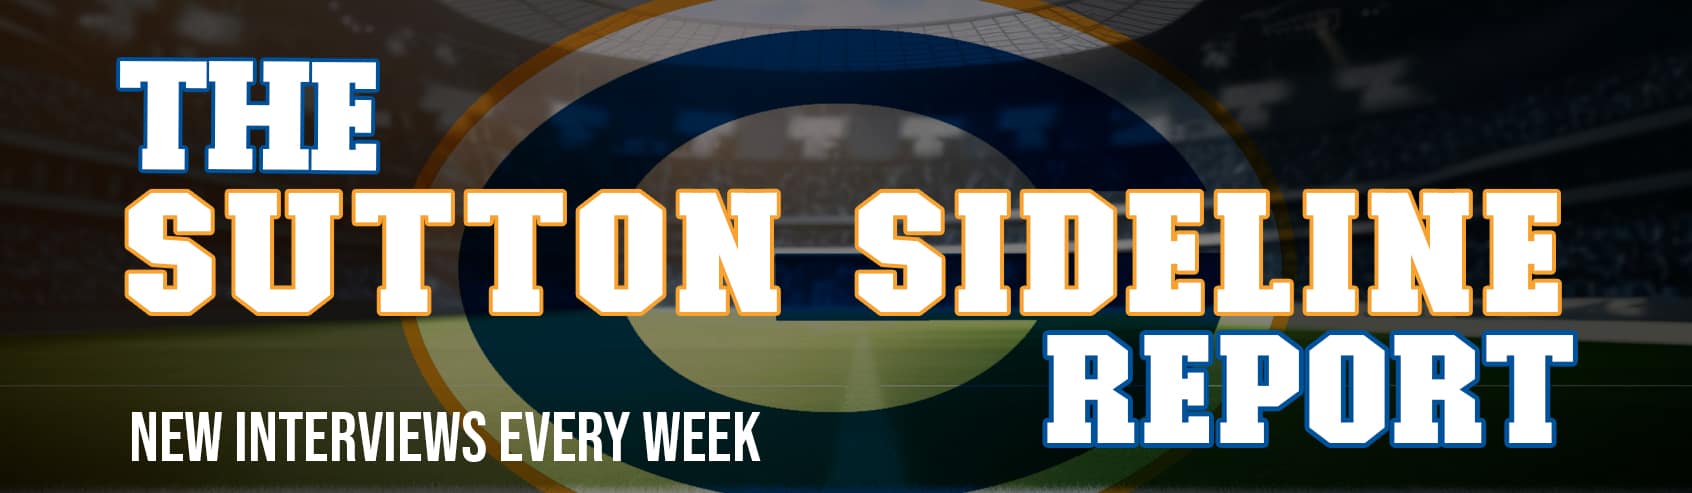 sutton sidelines Banner | Anything for Sports | Las Vegas Sports